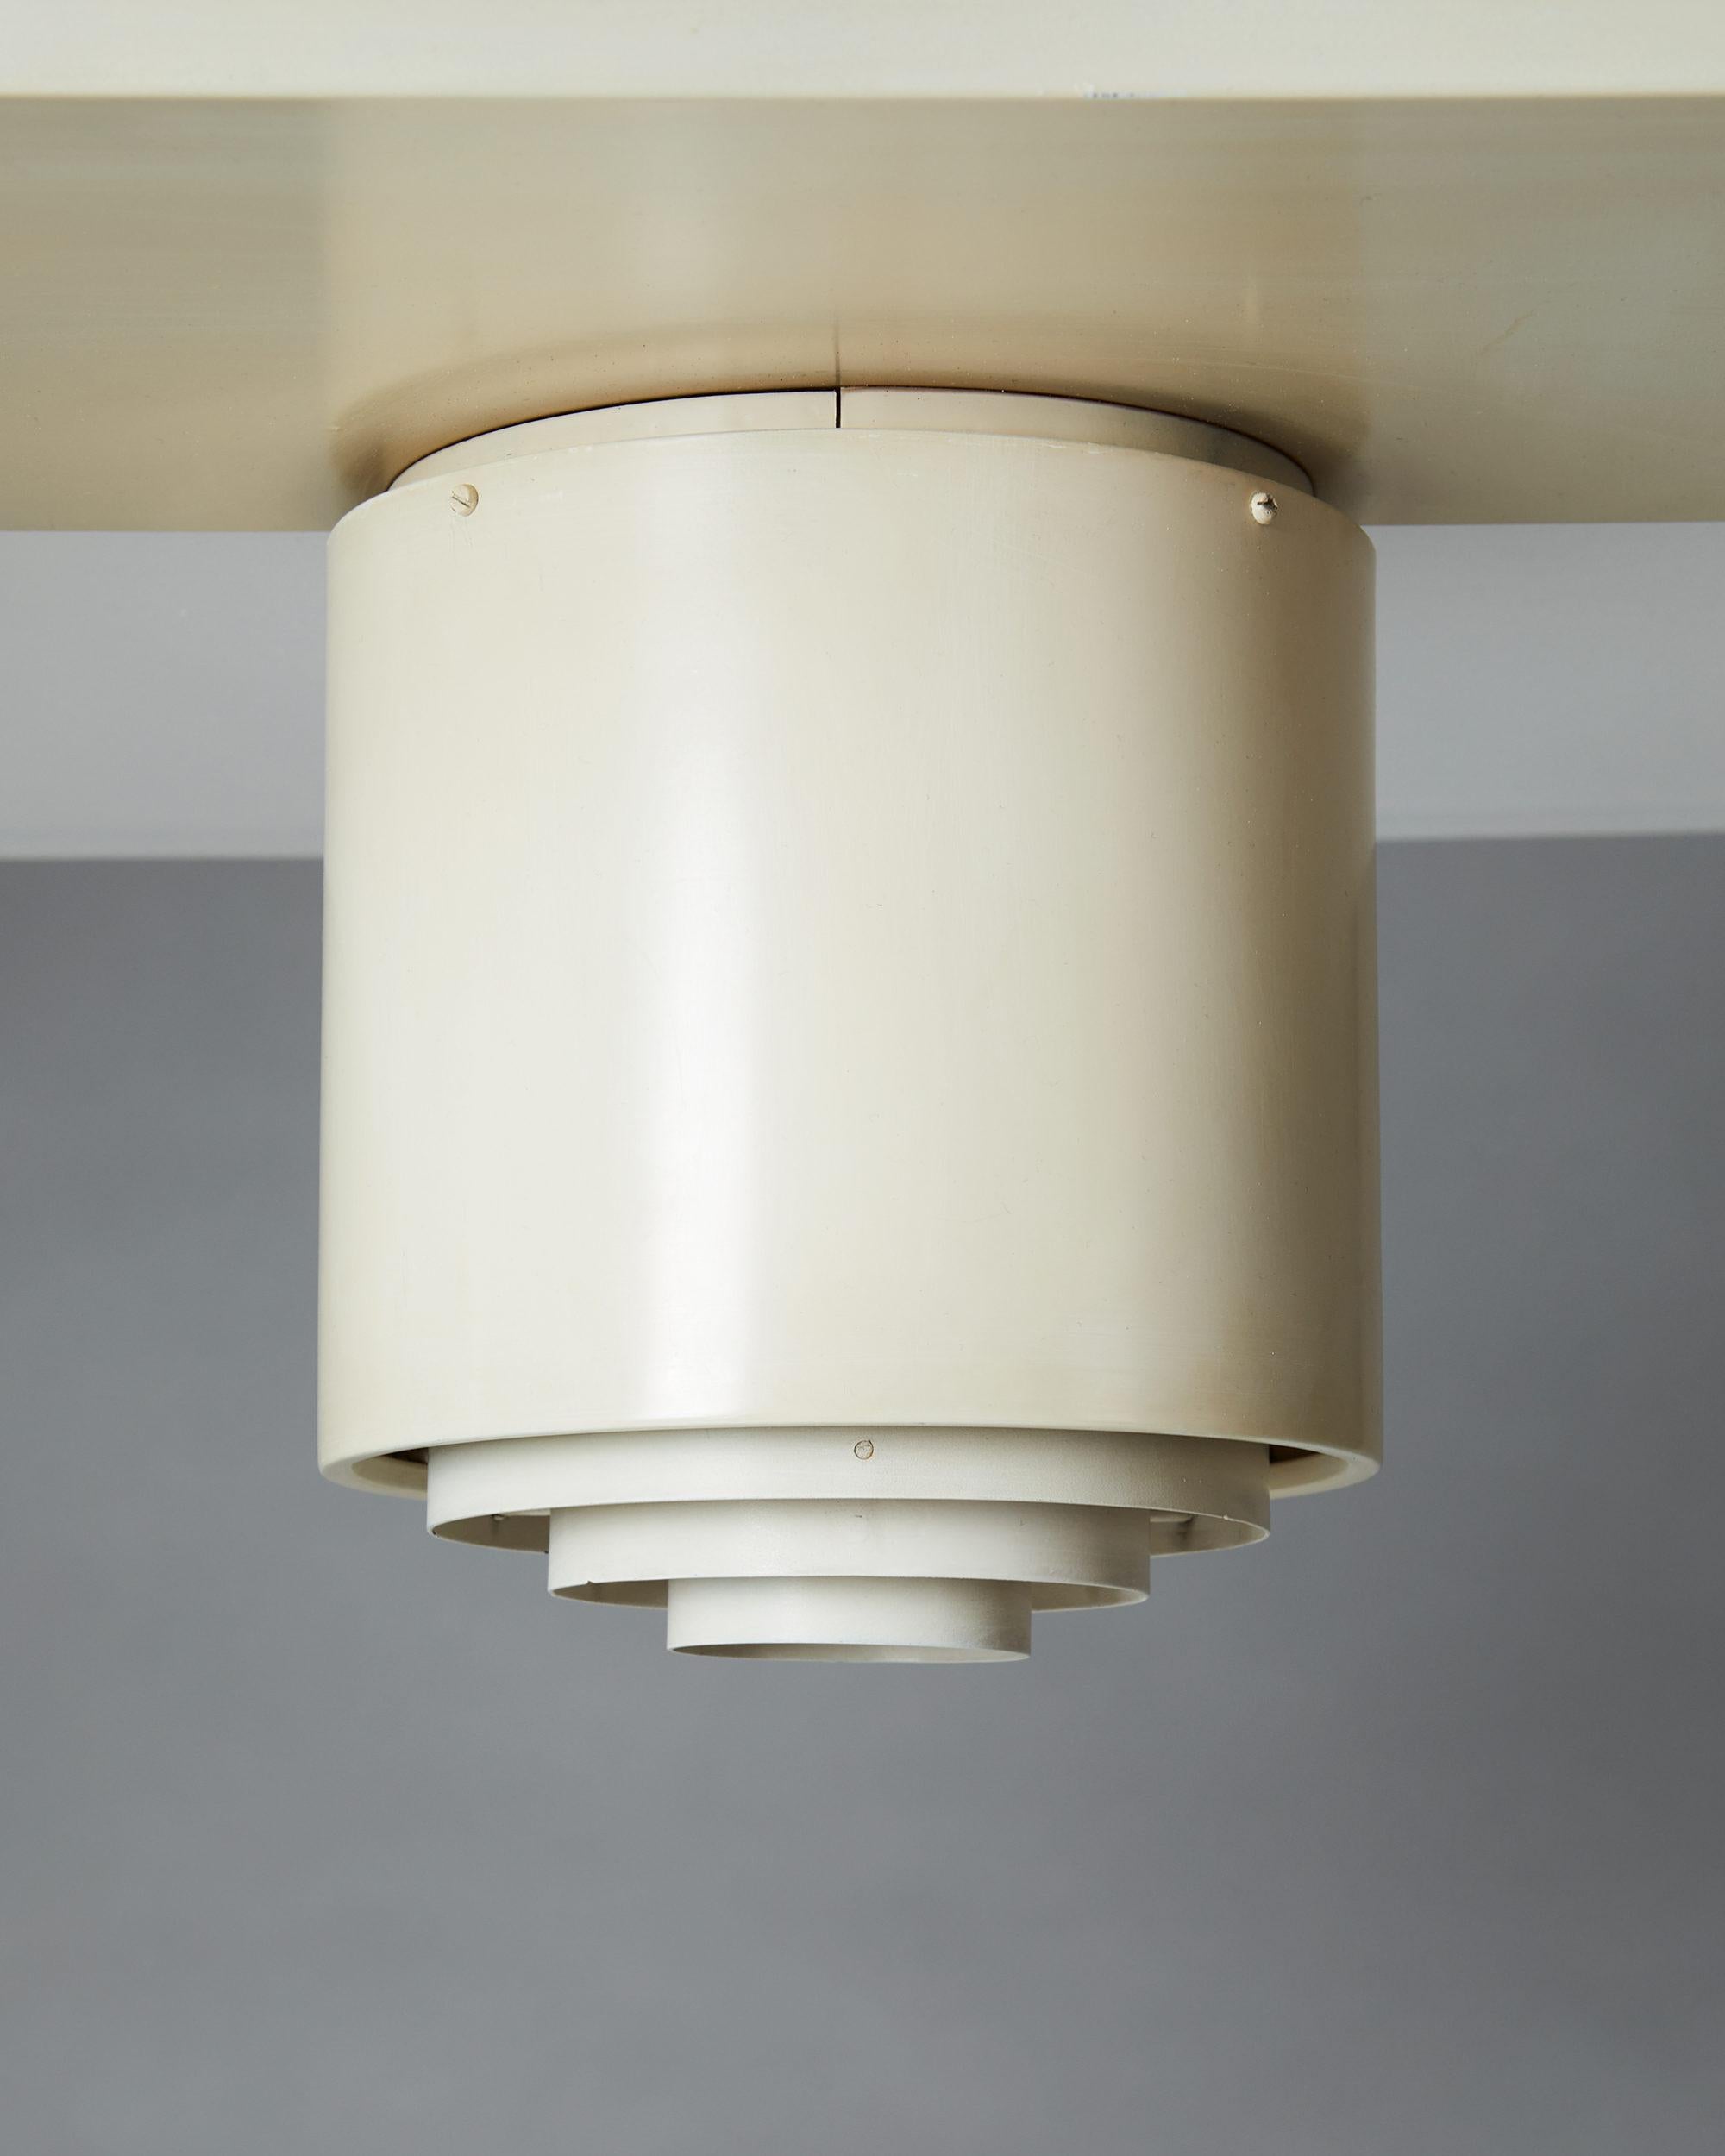 Mid-20th Century Ceiling Lamp Designed by Alvar Aalto for Idman, Finland, 1950s